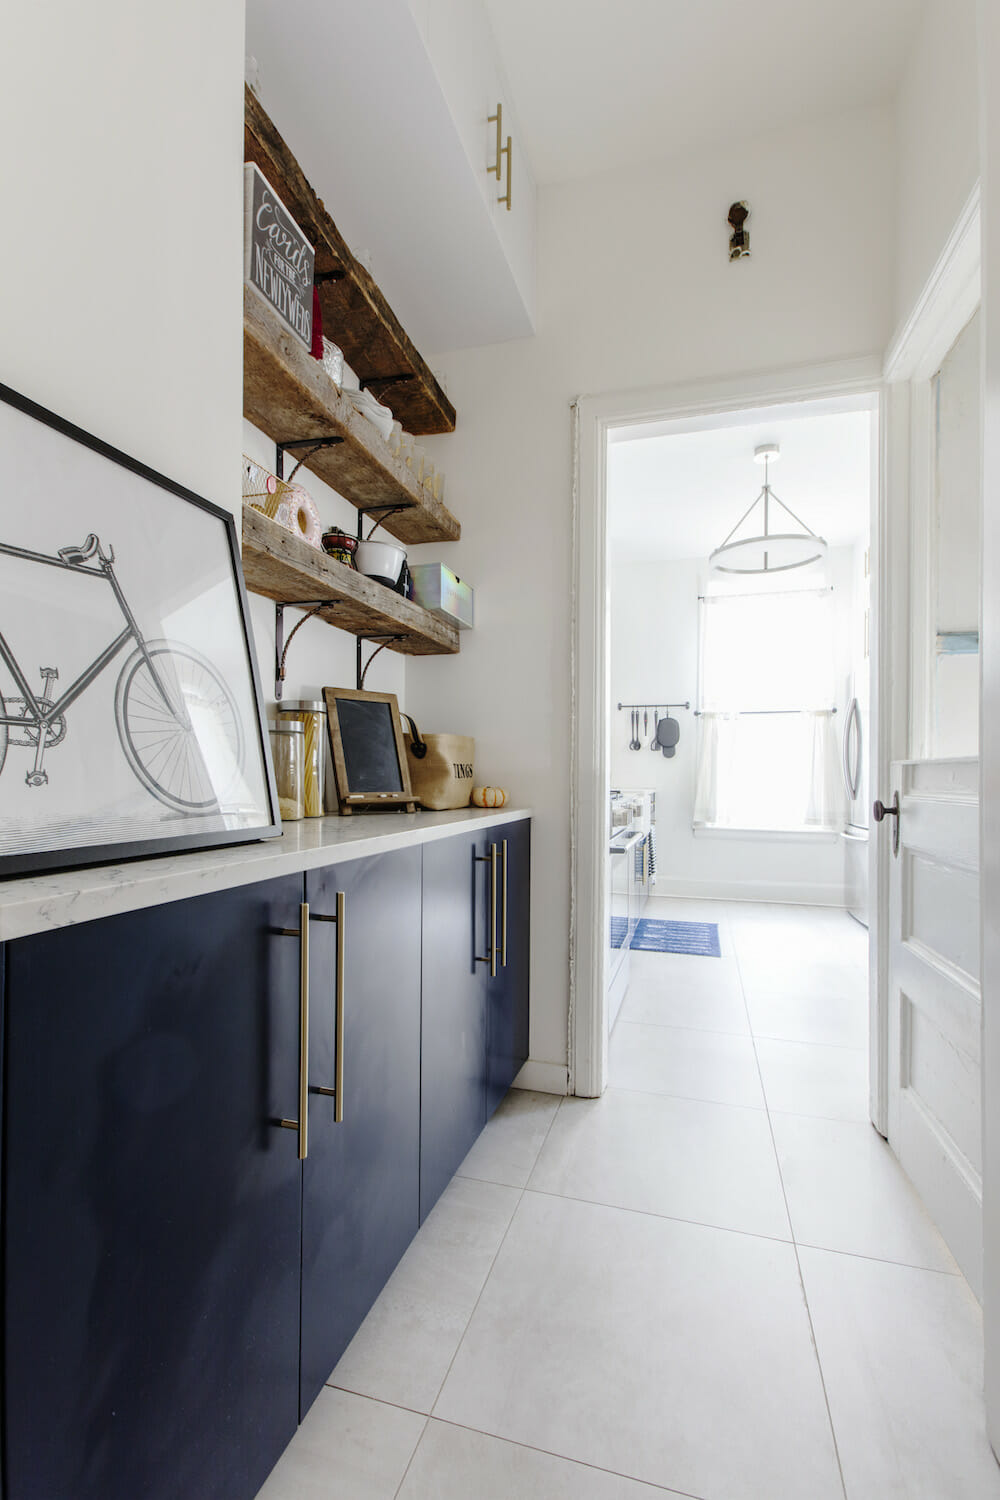 white kitchen countertop with navy blue cabinets and white walls and floating wooden shelves with brackets and white floor tiles after renovation